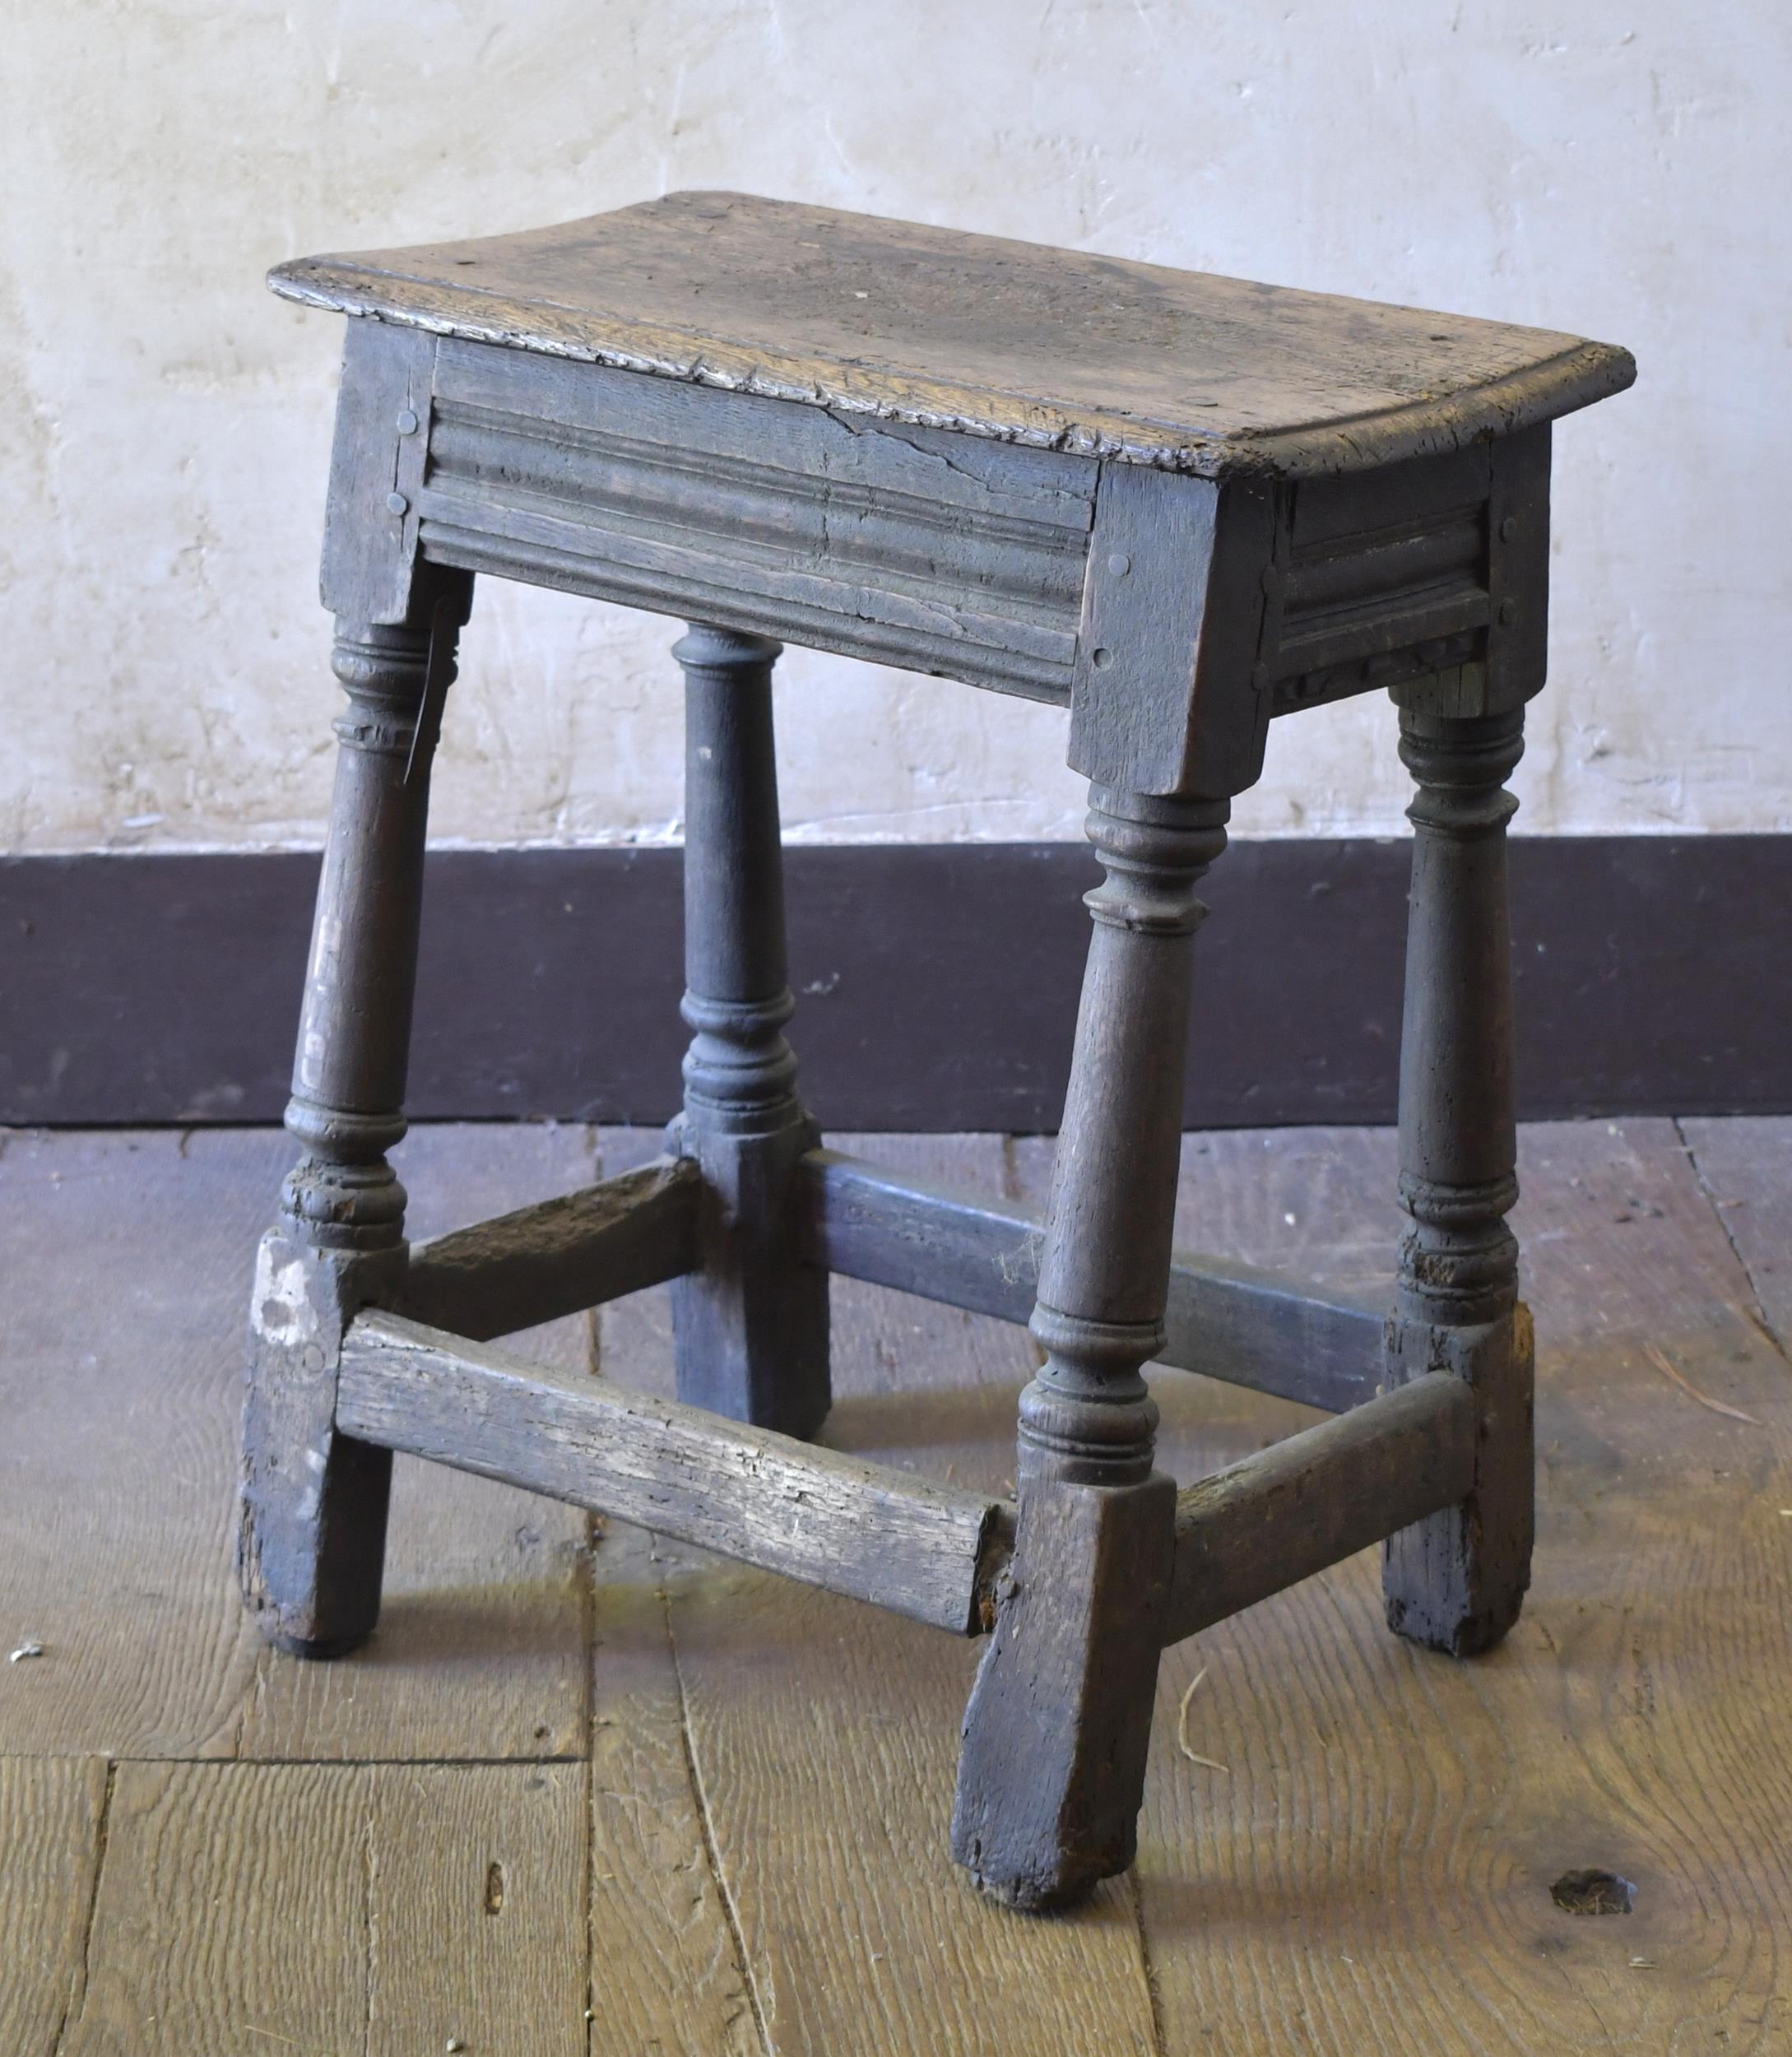 17TH C. ENGLISH JOINT STOOL. A